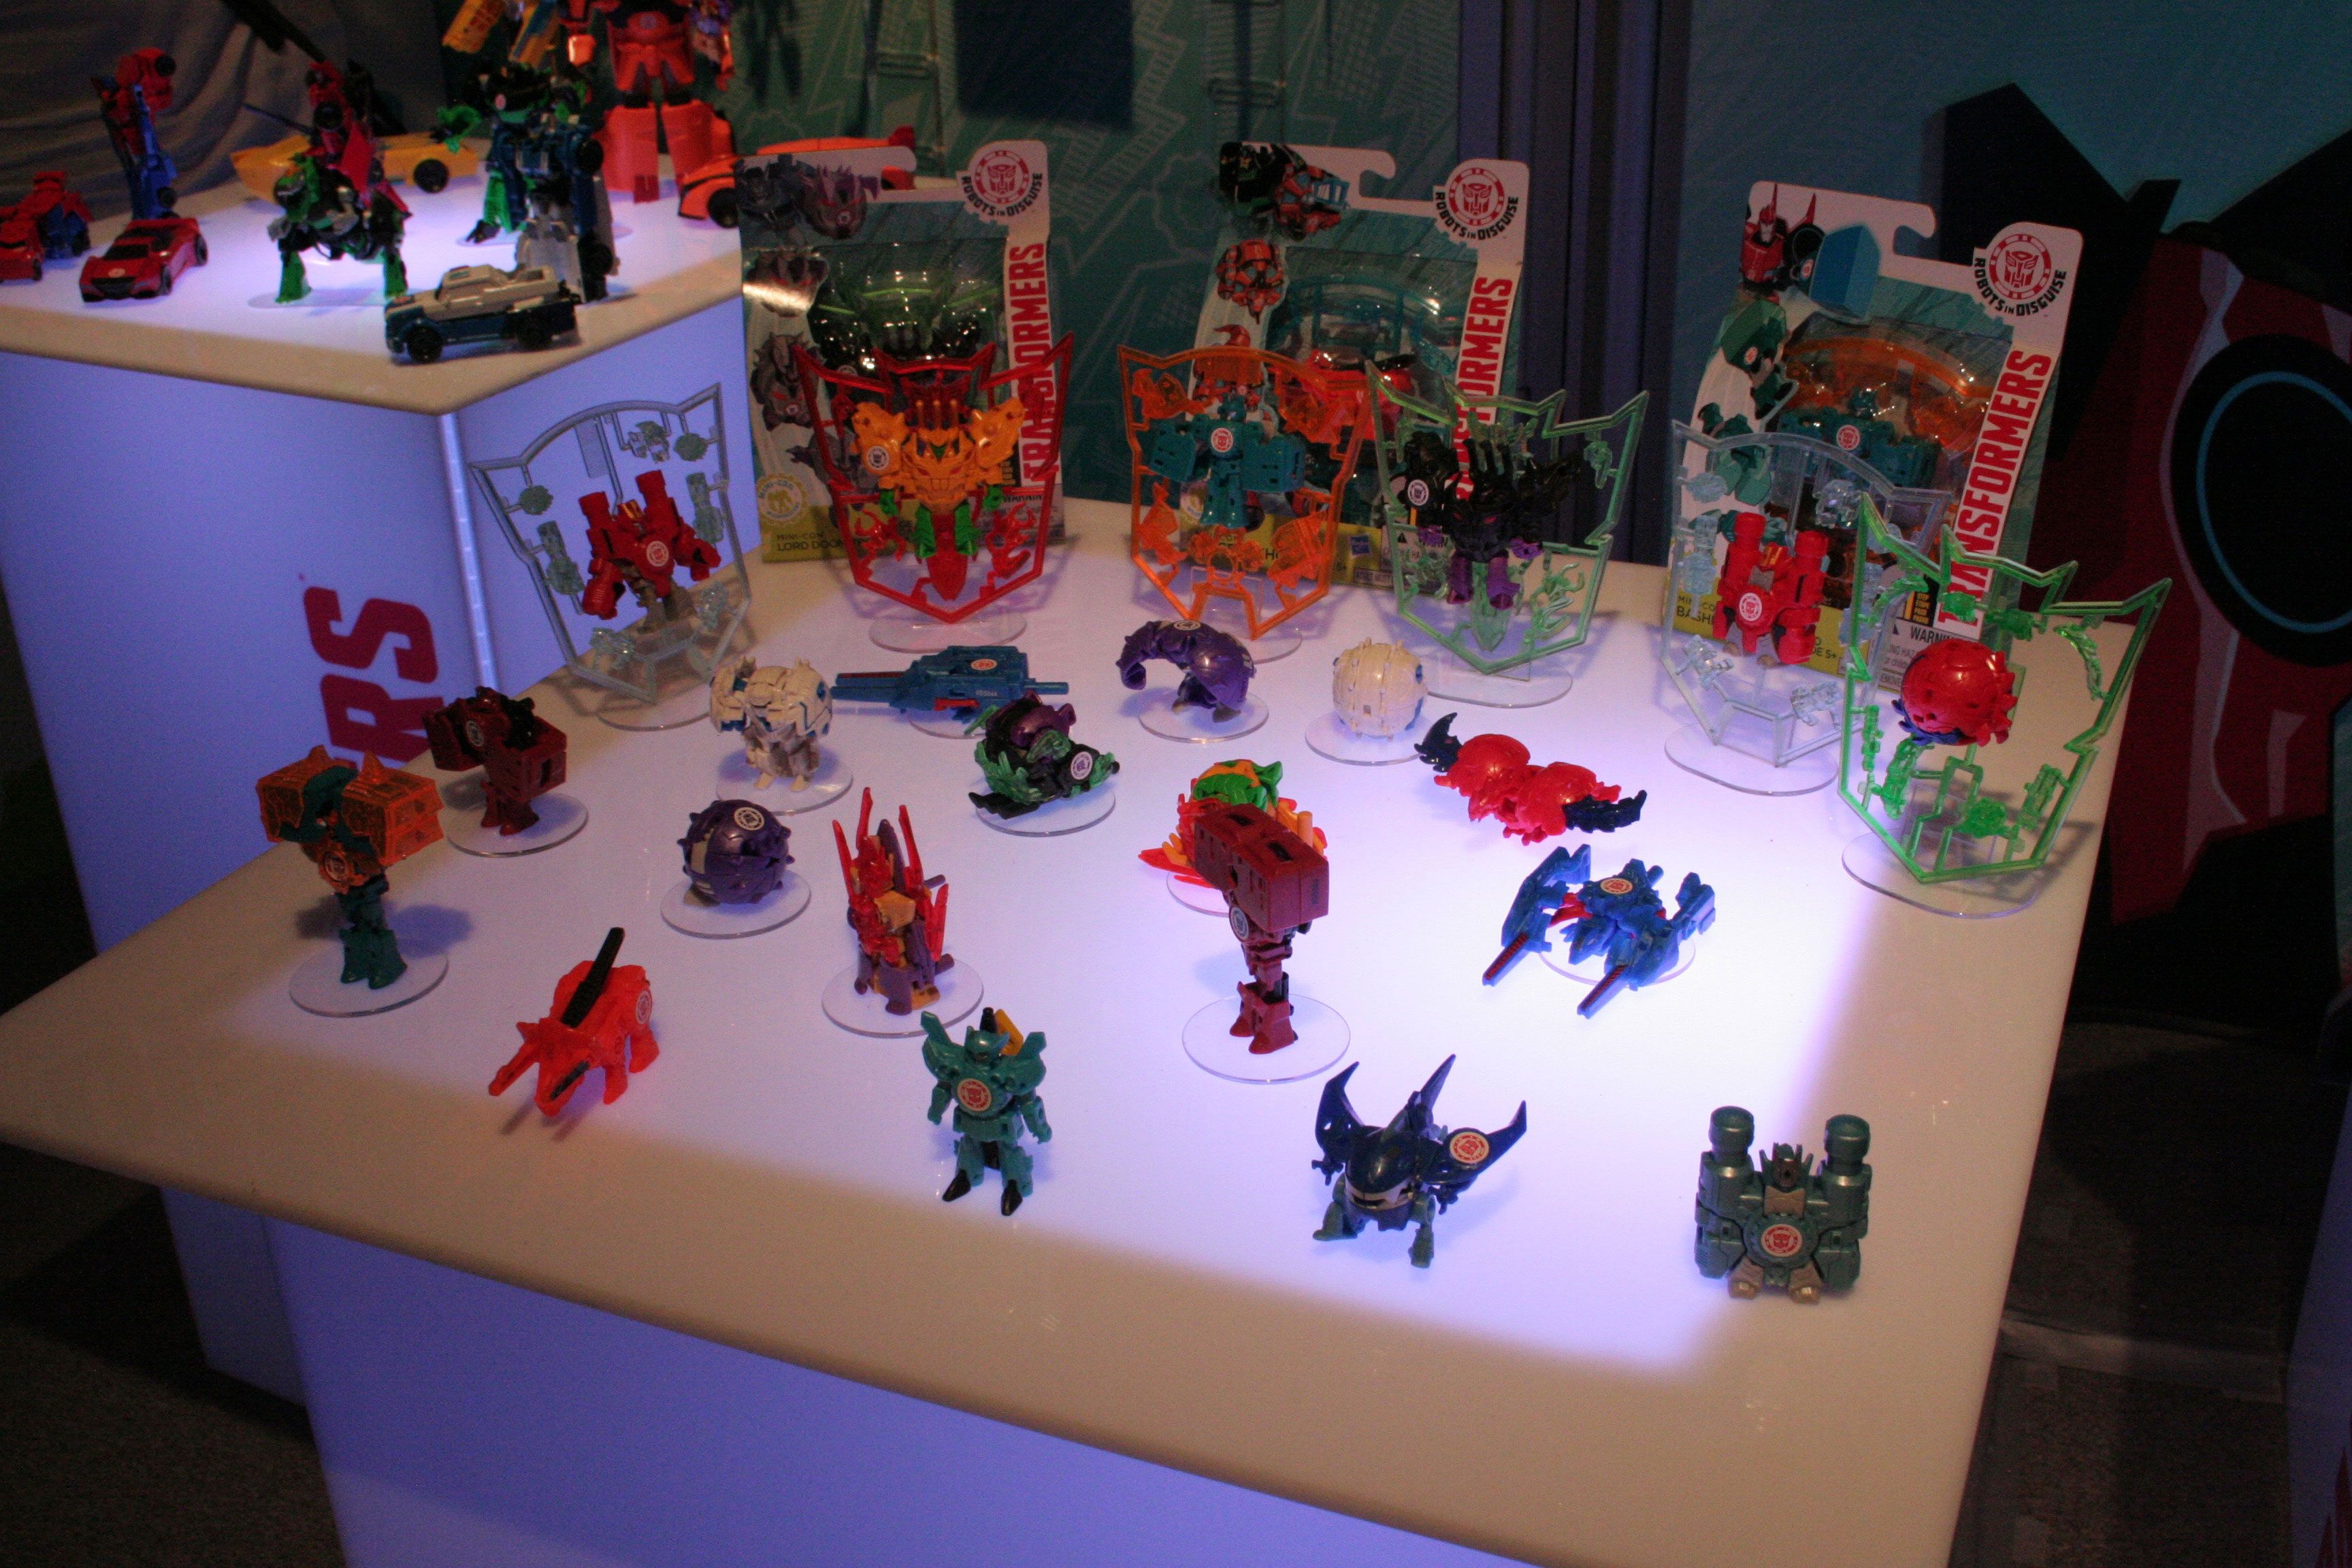 Transformers, Moana Images from Toy Fair 2016 - Collider